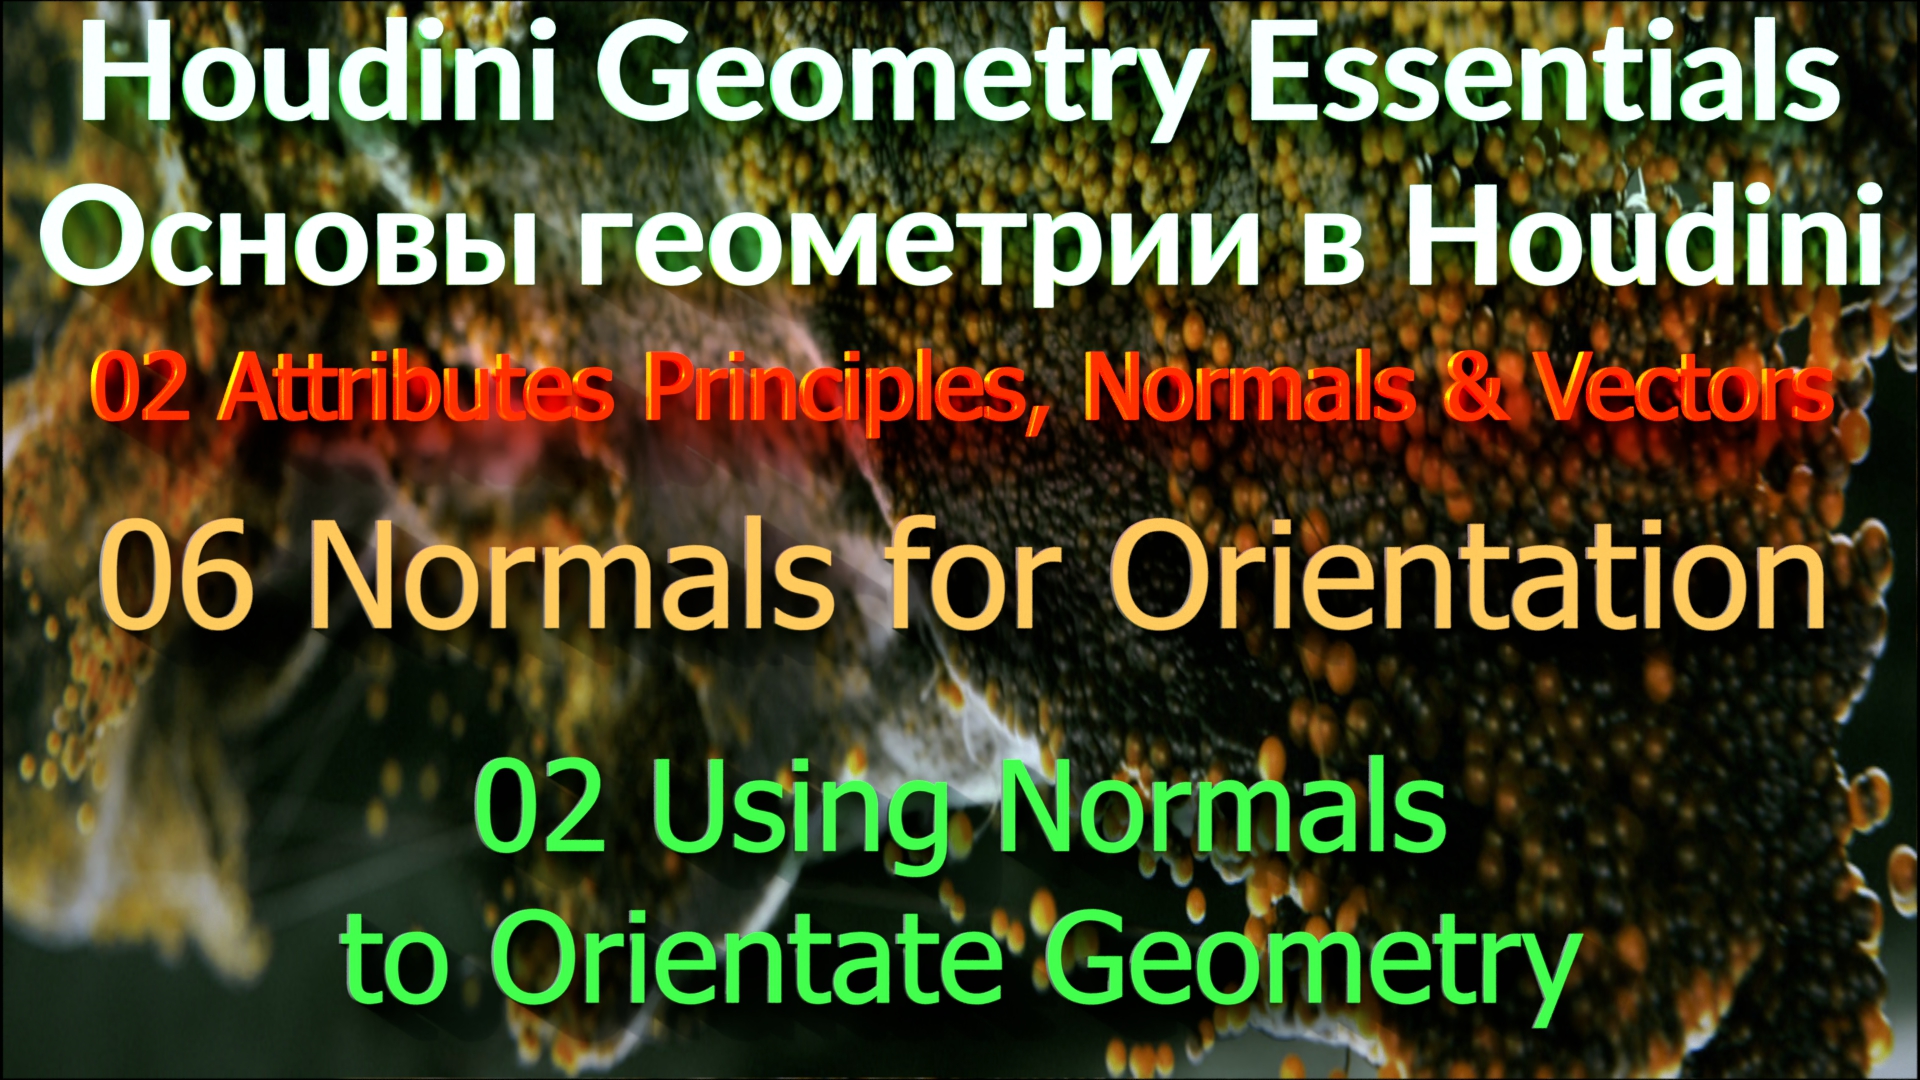 02_06_02 Using Normals to Orientate Geometry